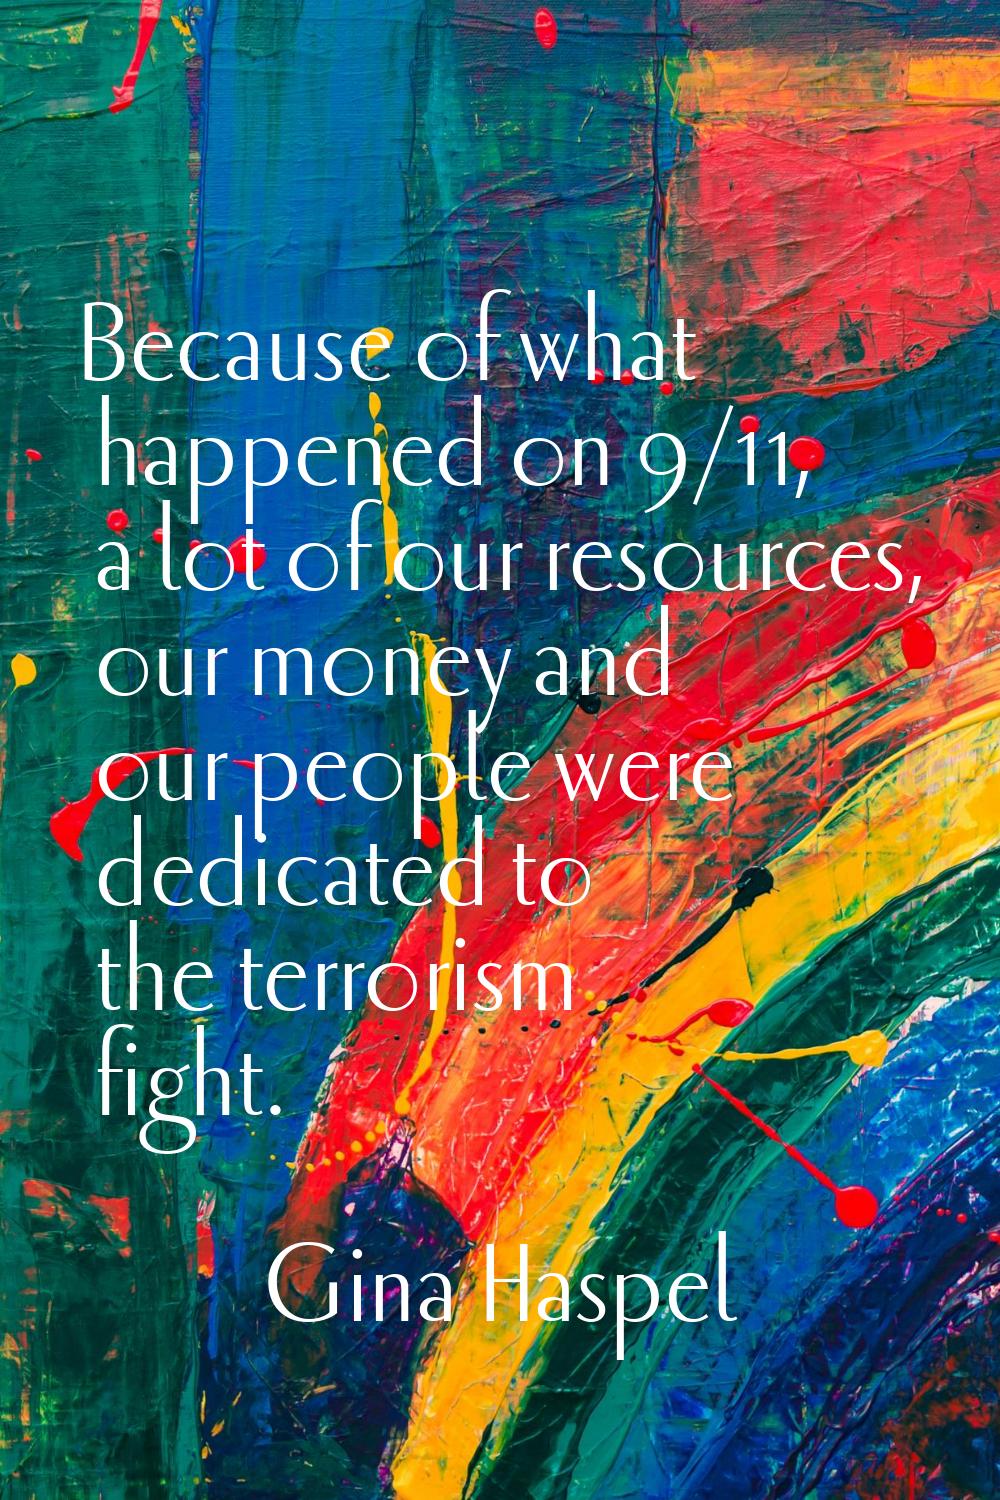 Because of what happened on 9/11, a lot of our resources, our money and our people were dedicated t